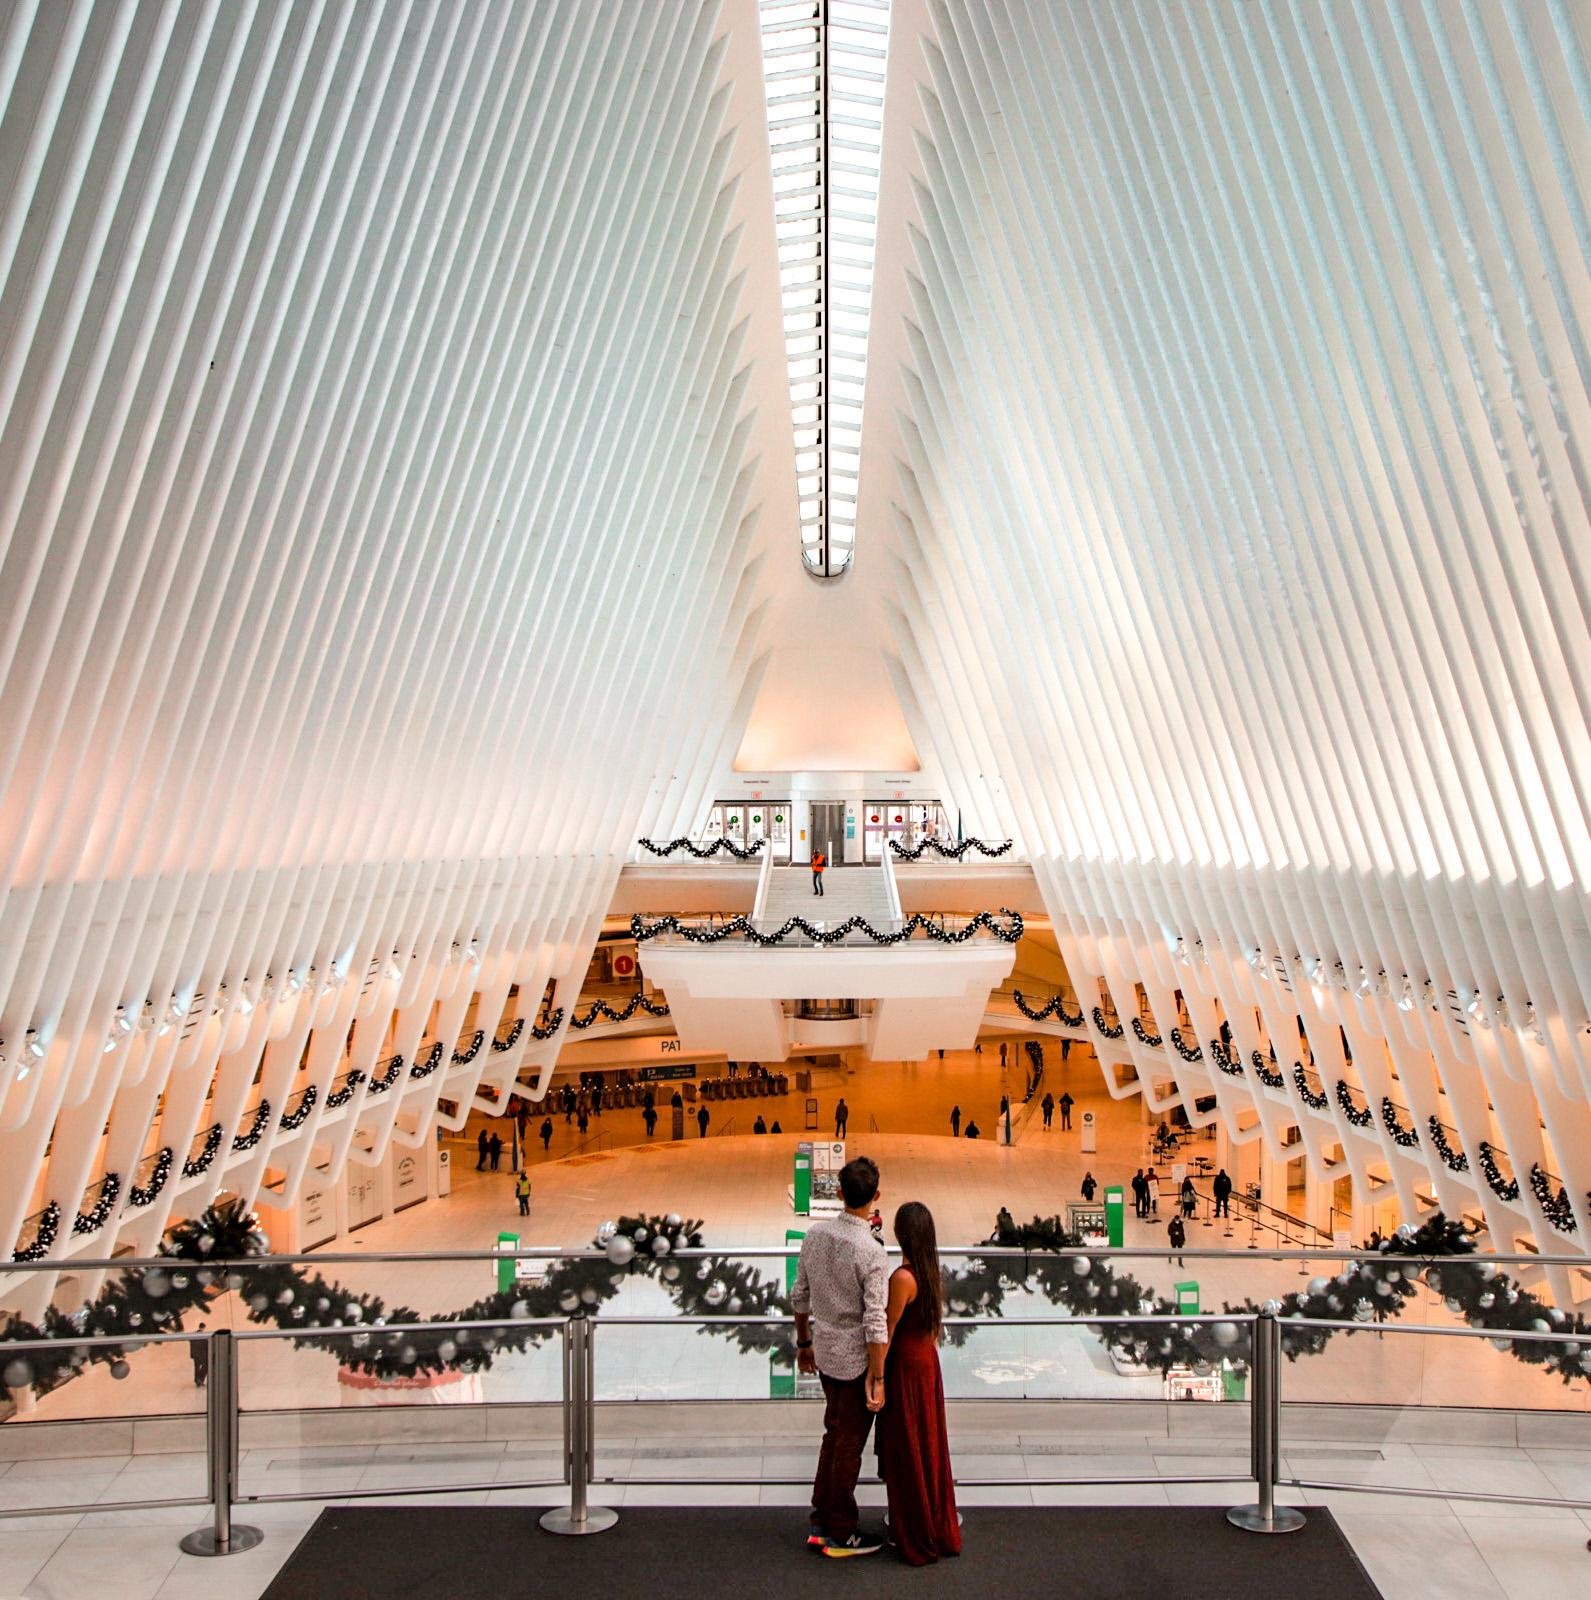 The Oculus, things to do in NYC for free